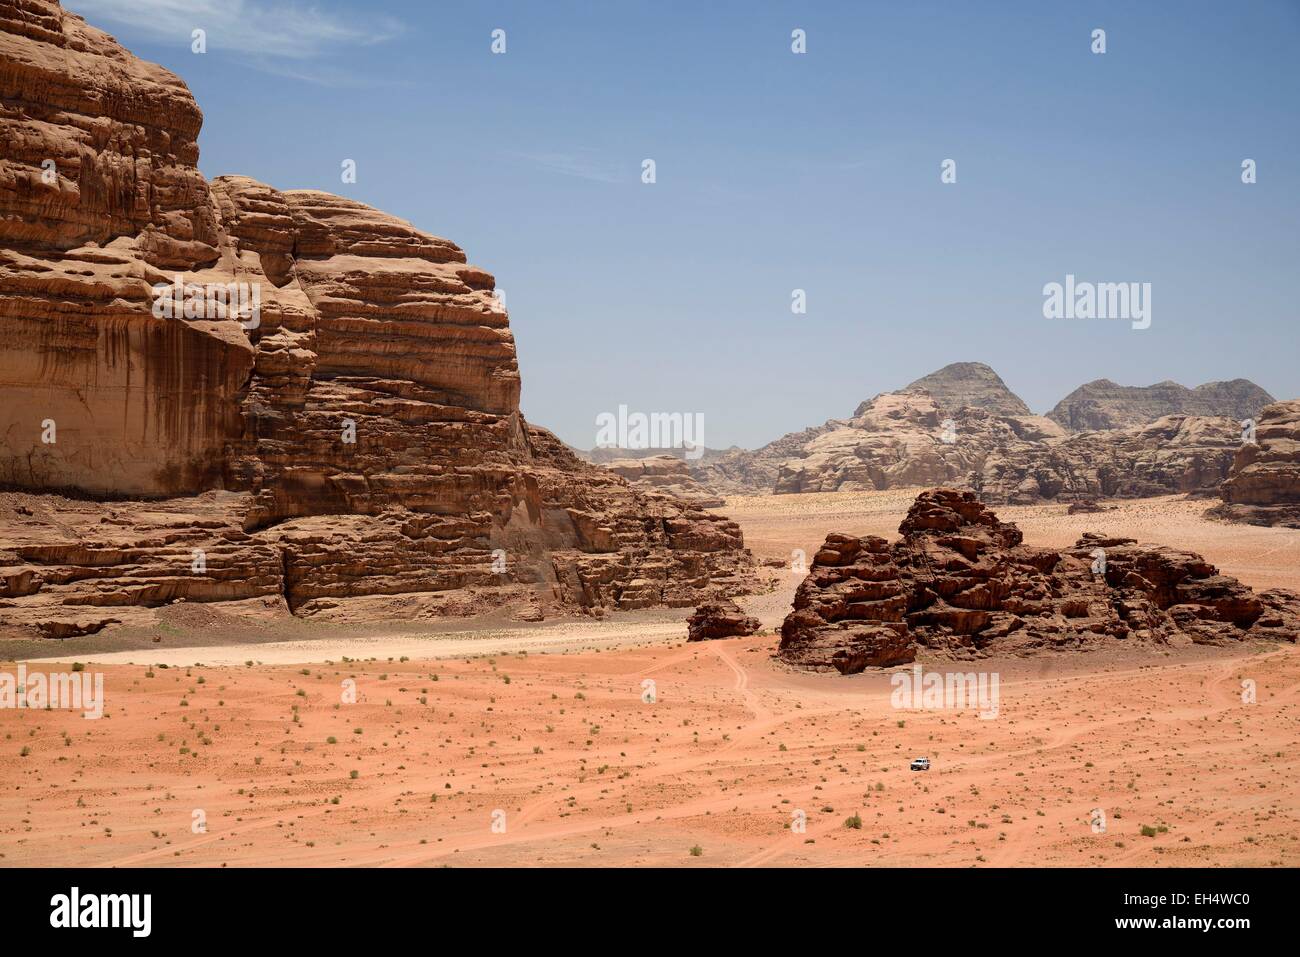 Jordan, Wadi Rum desert, protected area listed as World Heritage by UNESCO, desert of sand and rocks, view from Lawrence's house (Al-Qsair) Stock Photo